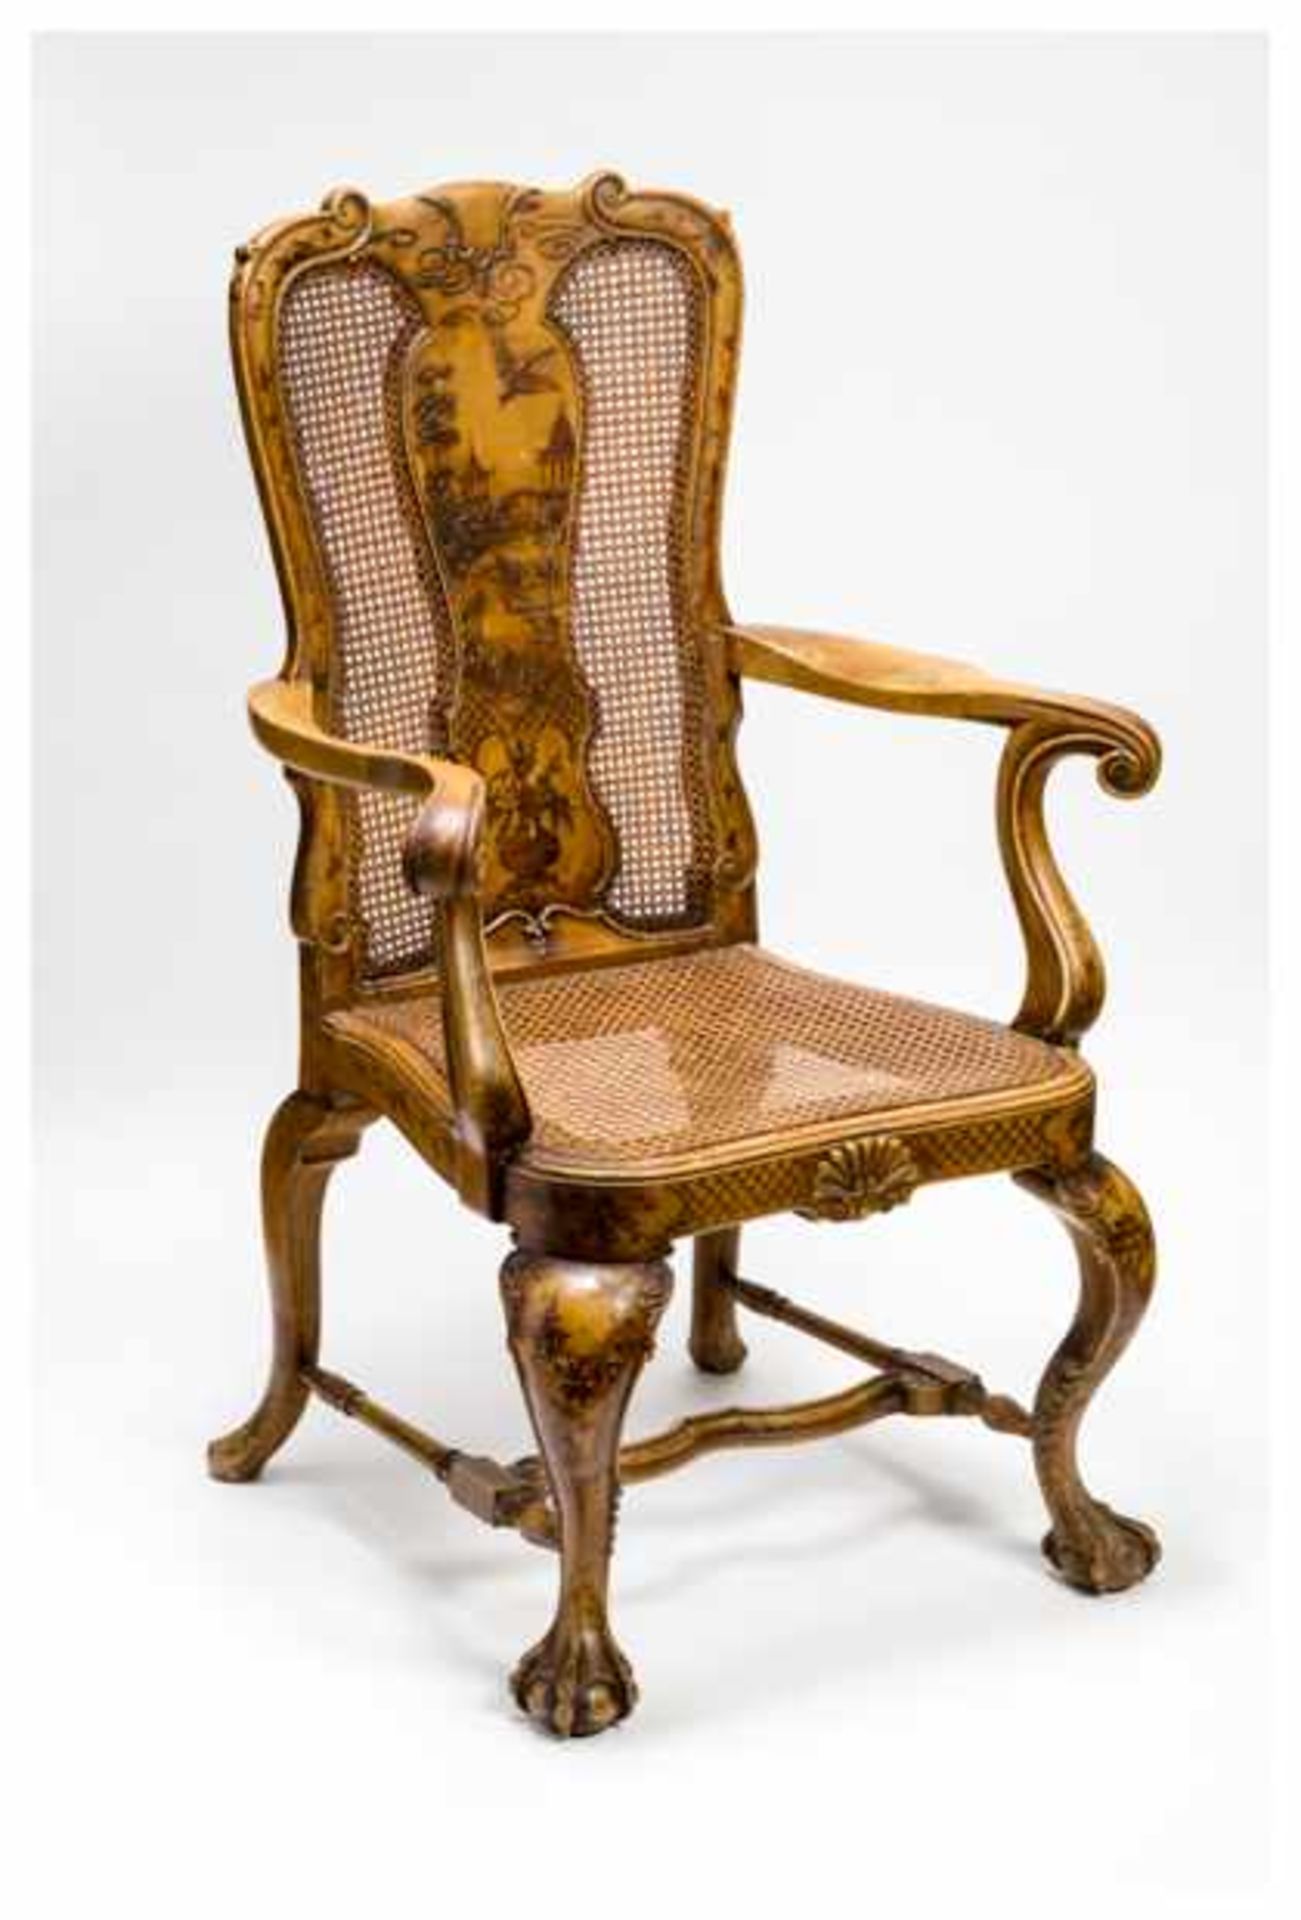 A CHINOISERIE ARMCHAIR Wood, lacquer and bamboo. China, 19th centuryAn elegant Chinoiserie